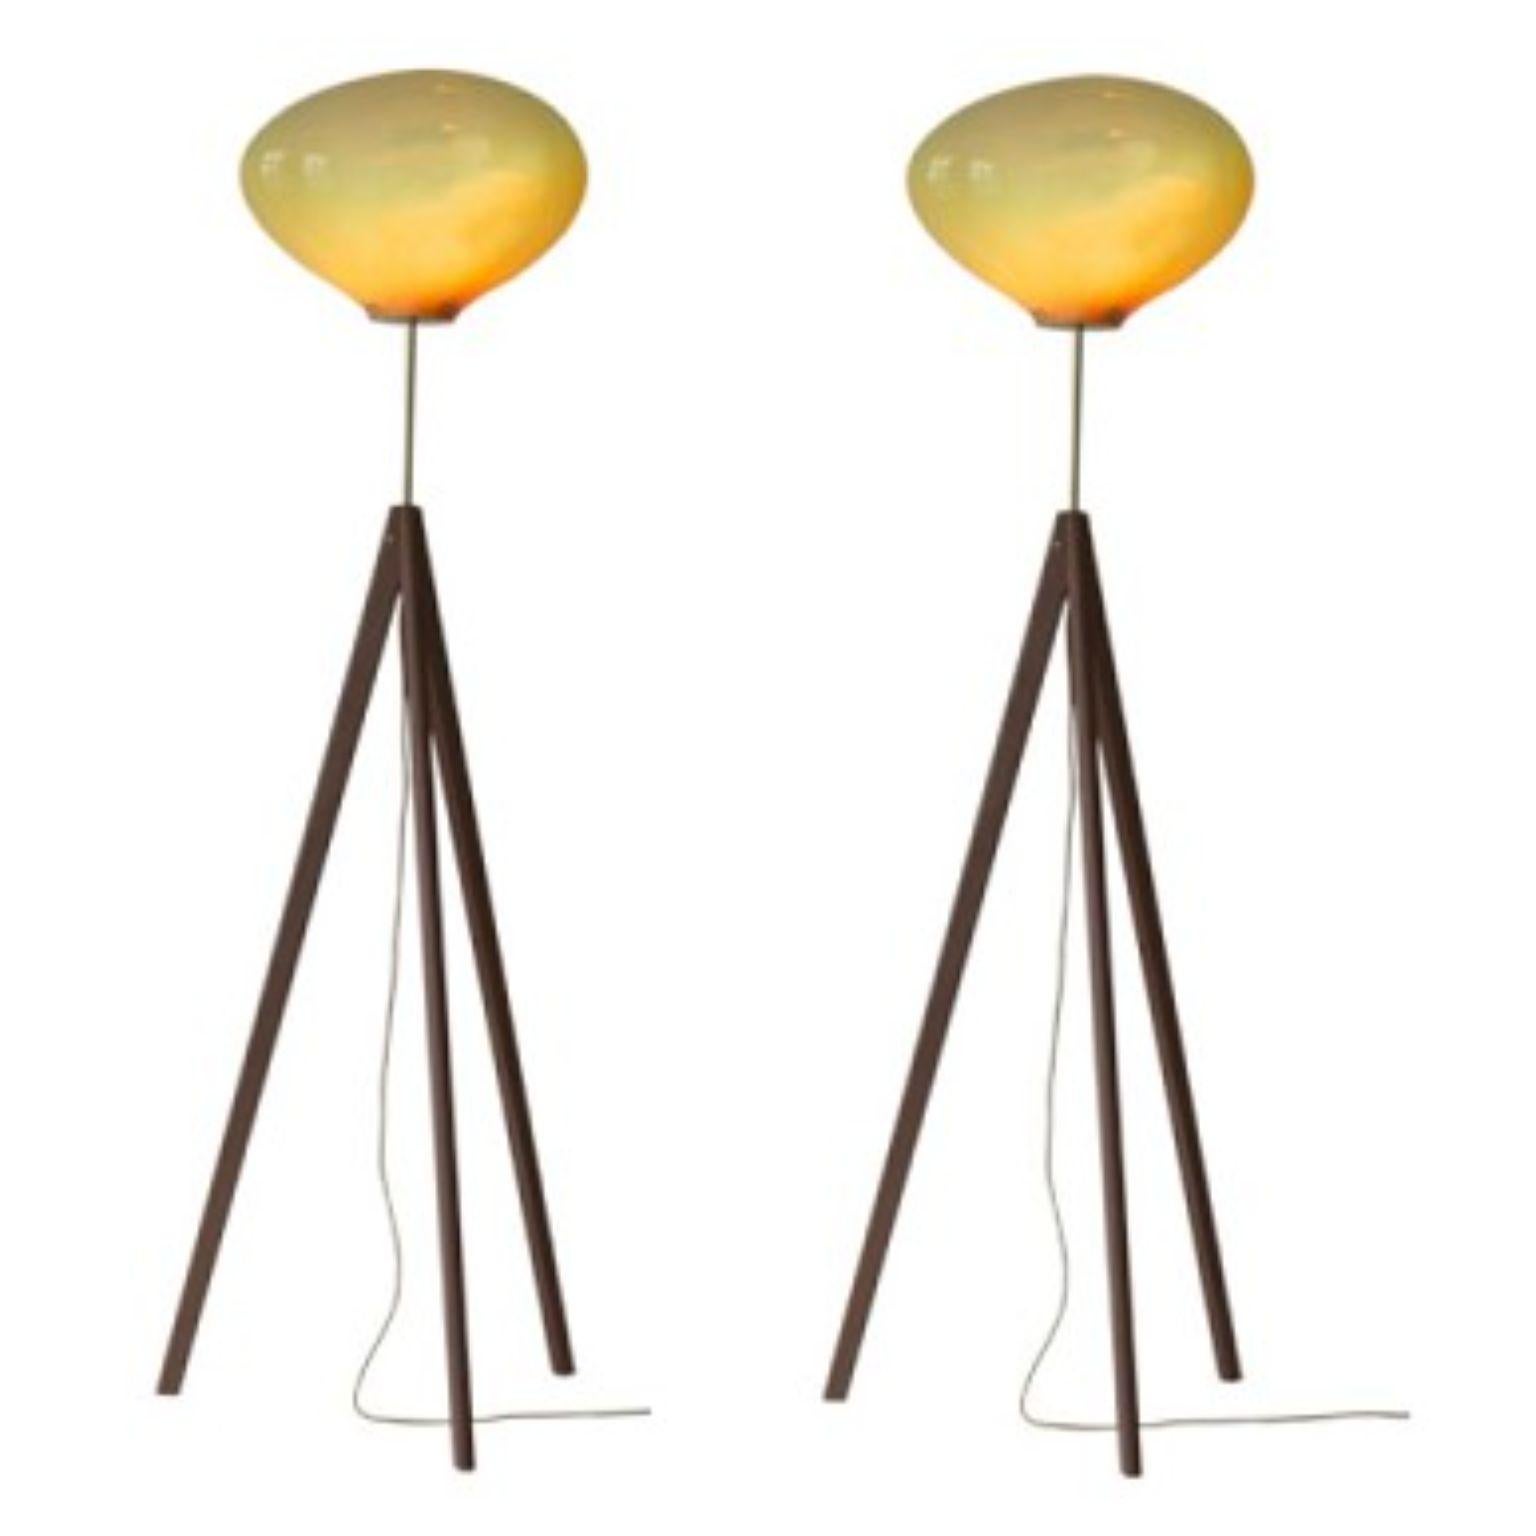 Set of 2 Stati X Amber Iridescent Floor Lamps by ELOA
Material: Glass, Steel, Silver, LED Bulb, Brass, Walnut,Oak
Dimensions: D62 x W62 x H180 cm
Also Available in different colours and dimensions.

All our lamps can be wired according to each